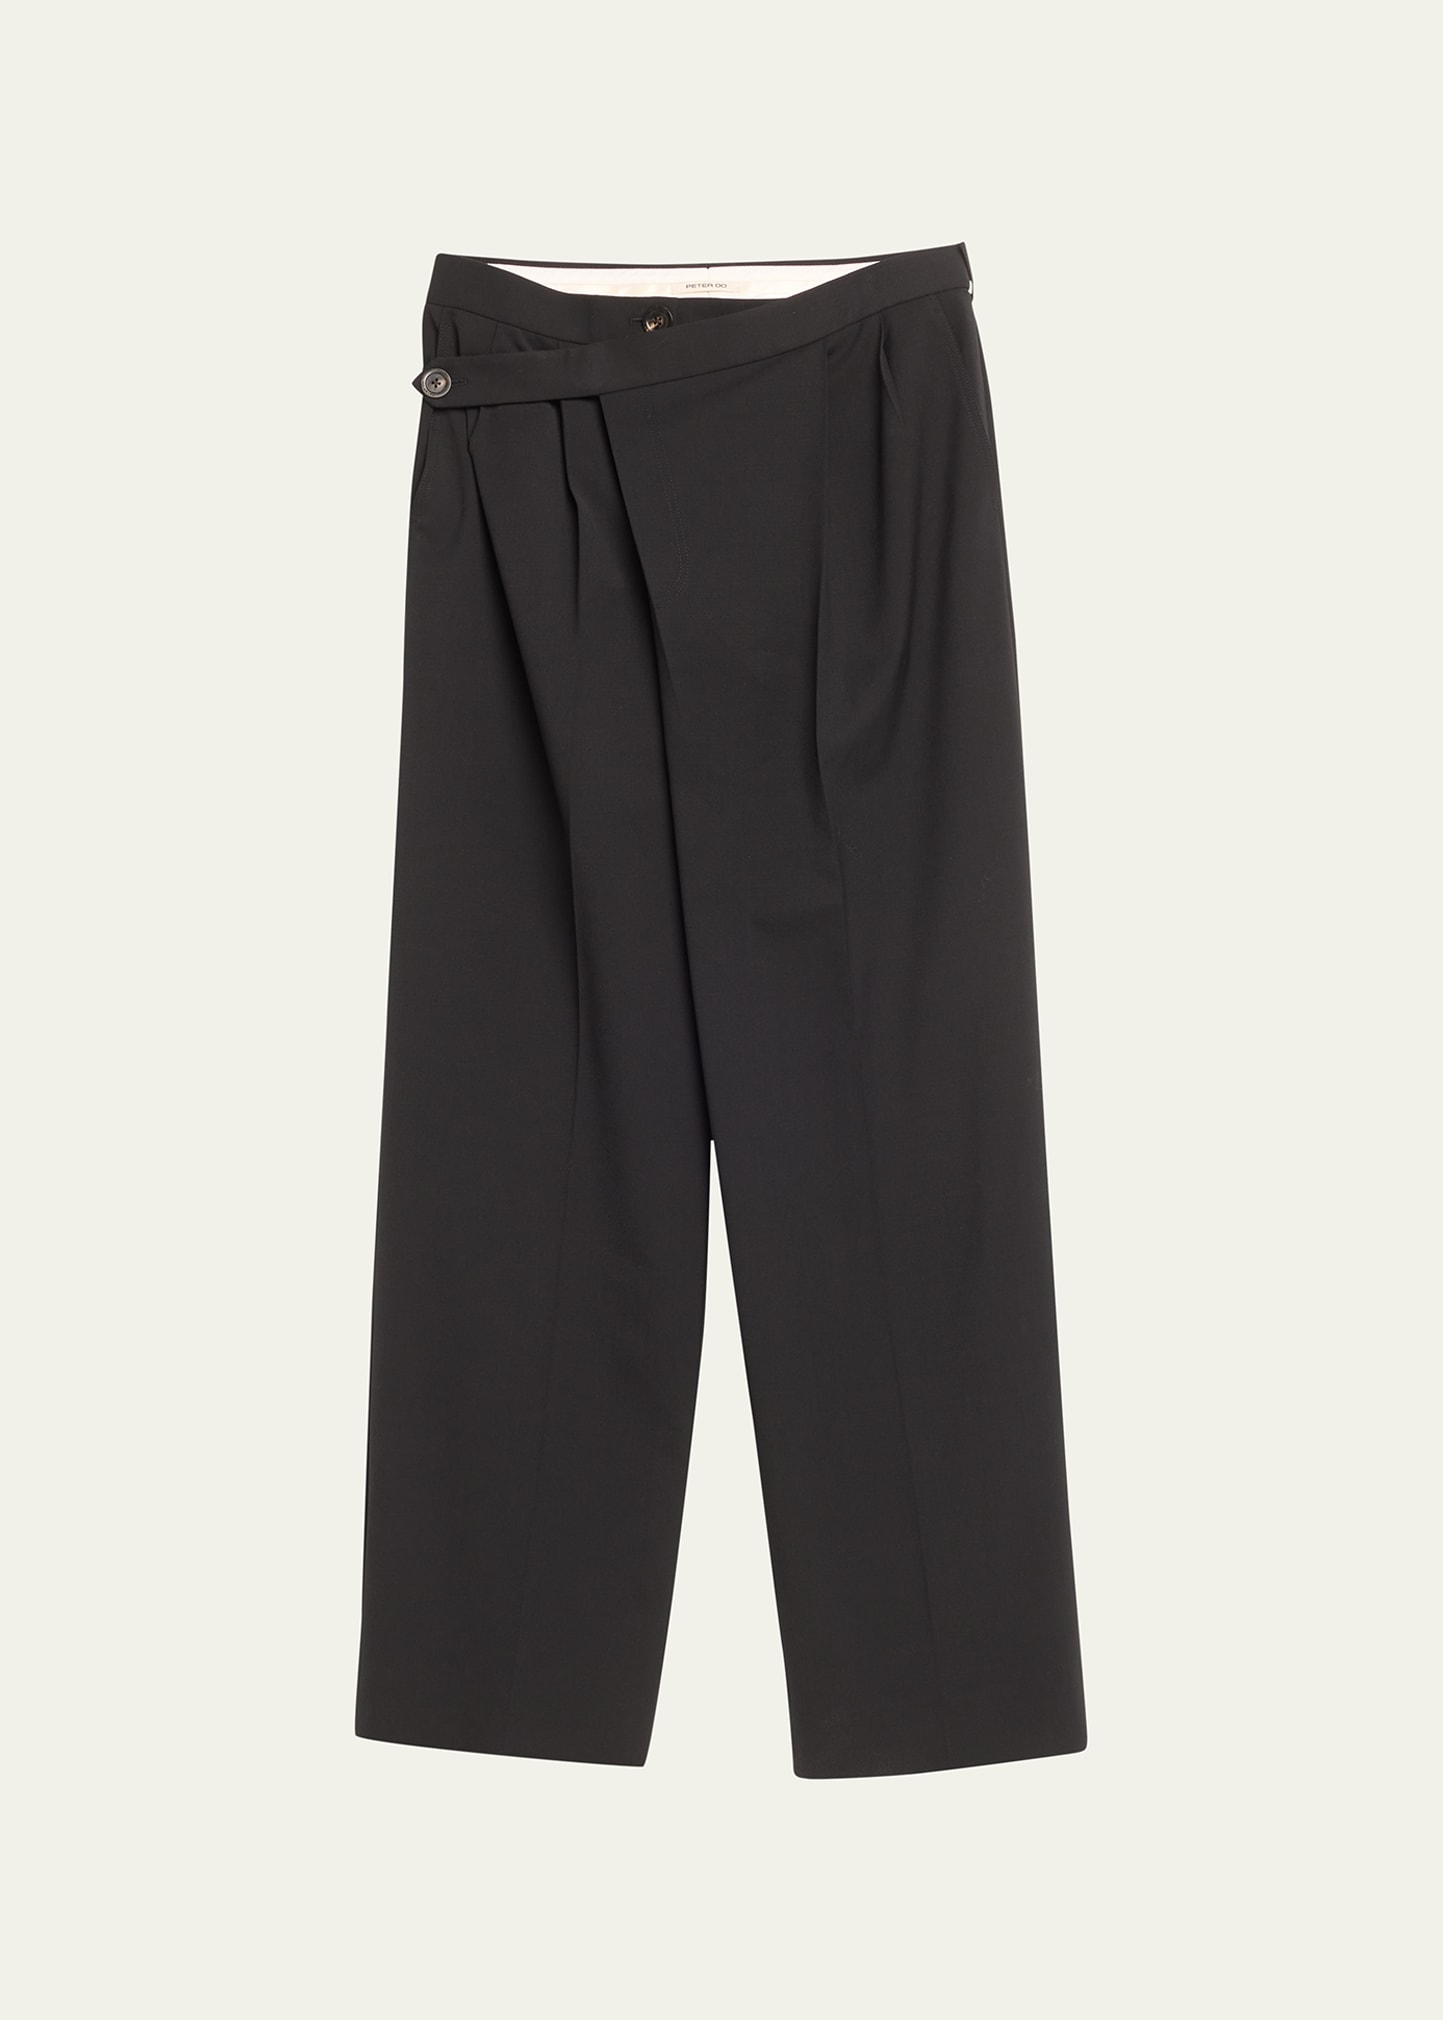 Men's Pleated Pants with Wrap Closure